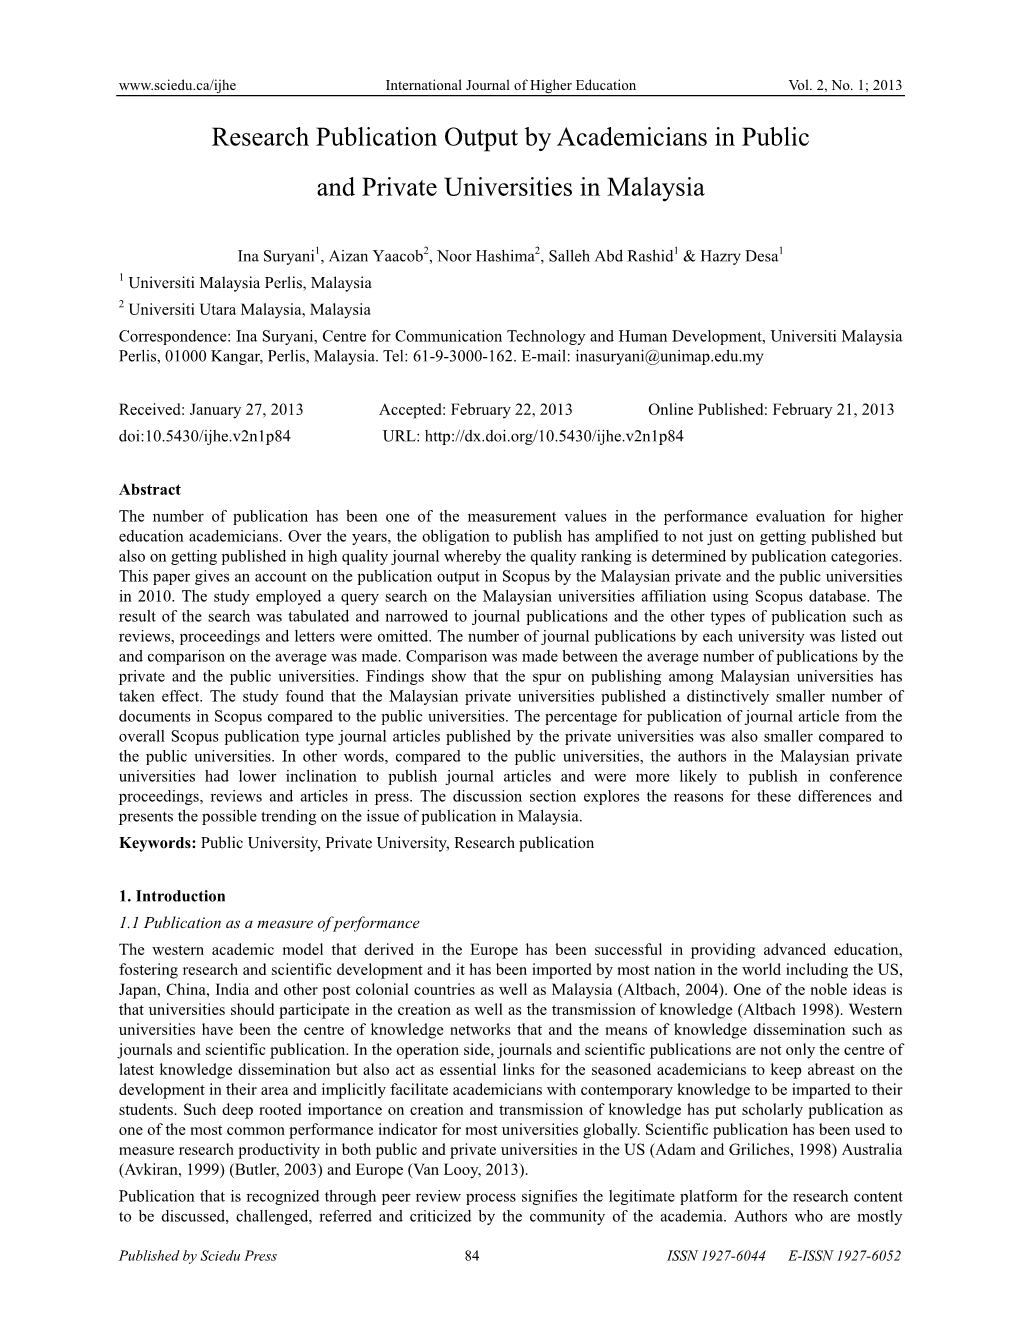 Research Publication Output by Academicians in Public and Private Universities in Malaysia